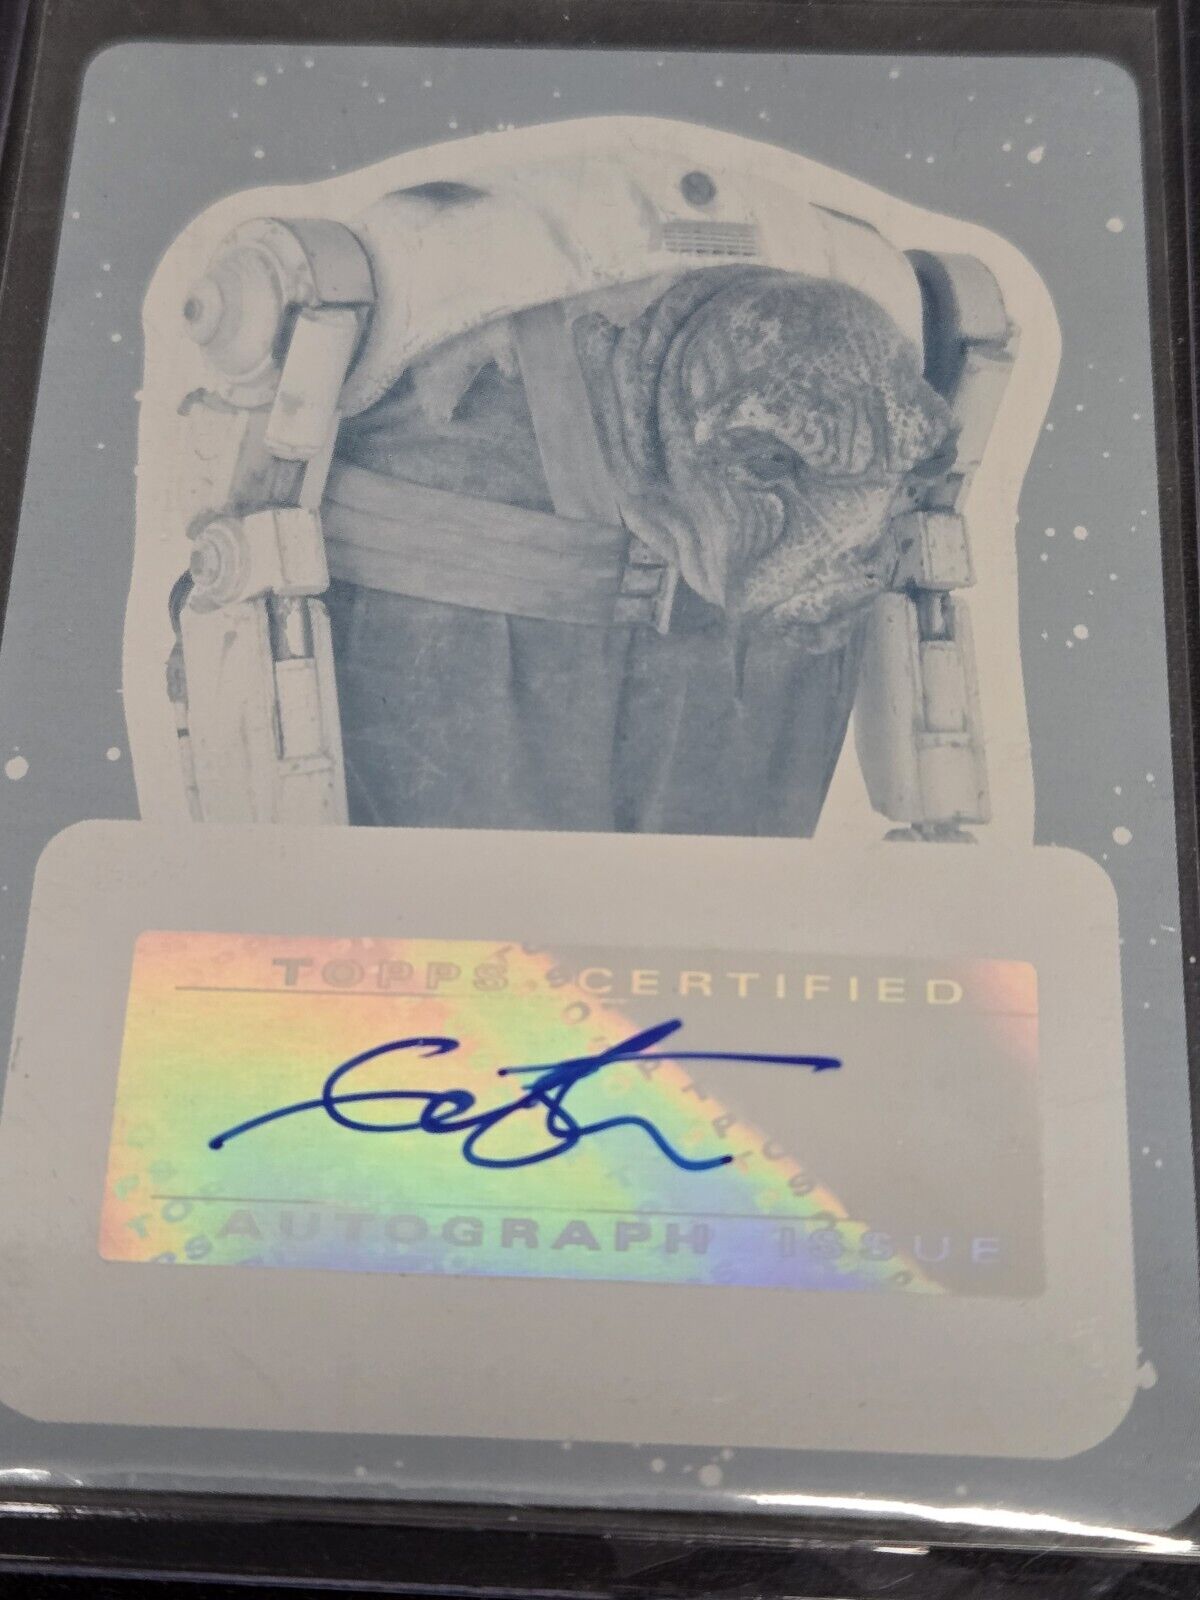 ☆~STAR WARS~☆ 1 of 1 AUTOGRAPH PRITING PLATE ☆ TOPPS 2019 CYAN ☆ ONE OF A KIND